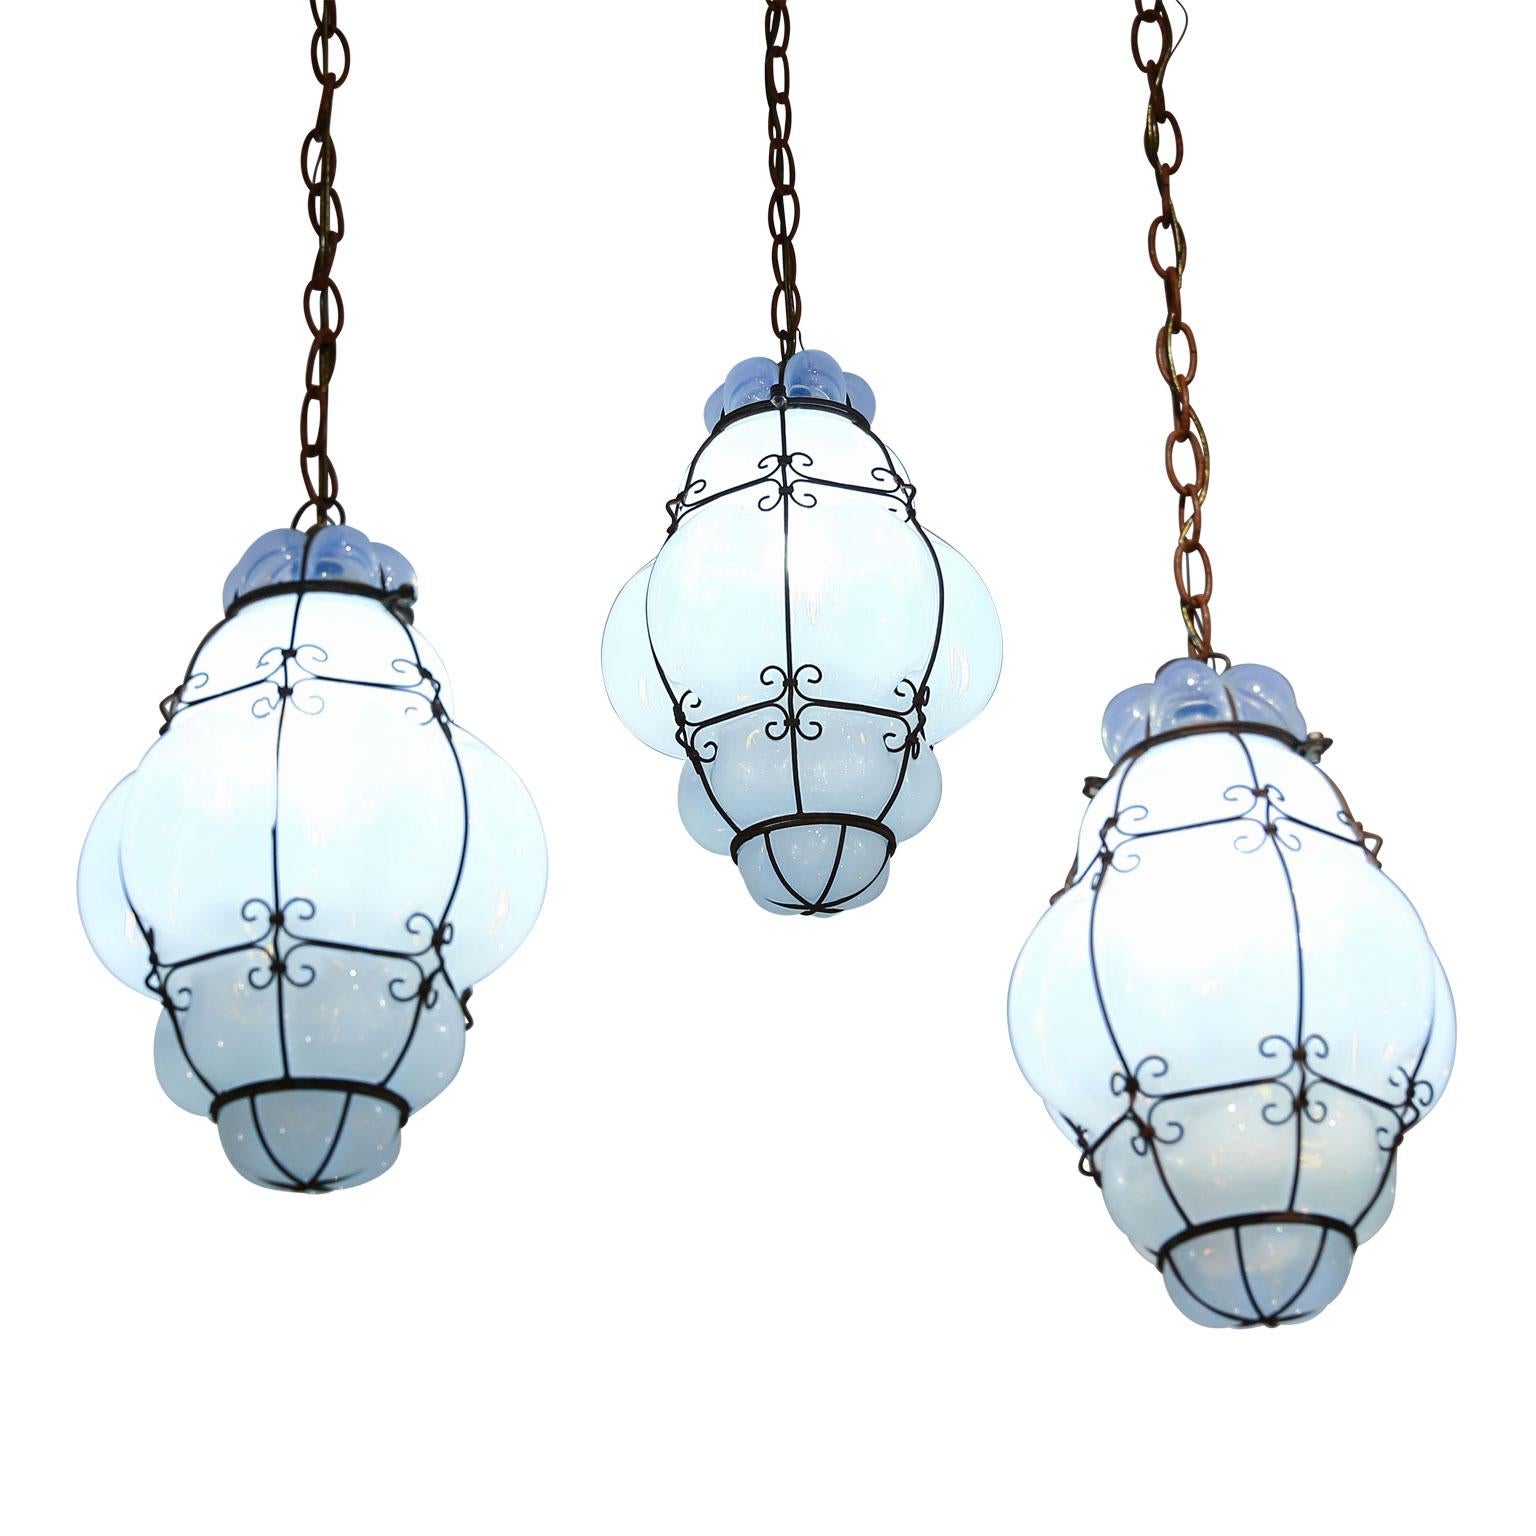 Three caged white glass Italian pendants, (circa 1930-1950). White glass turns a cool opal-like color when pendant is lit. Newly wired for use within the USA using all UL approved parts. Each pendant includes chain and a canopy (listed height does